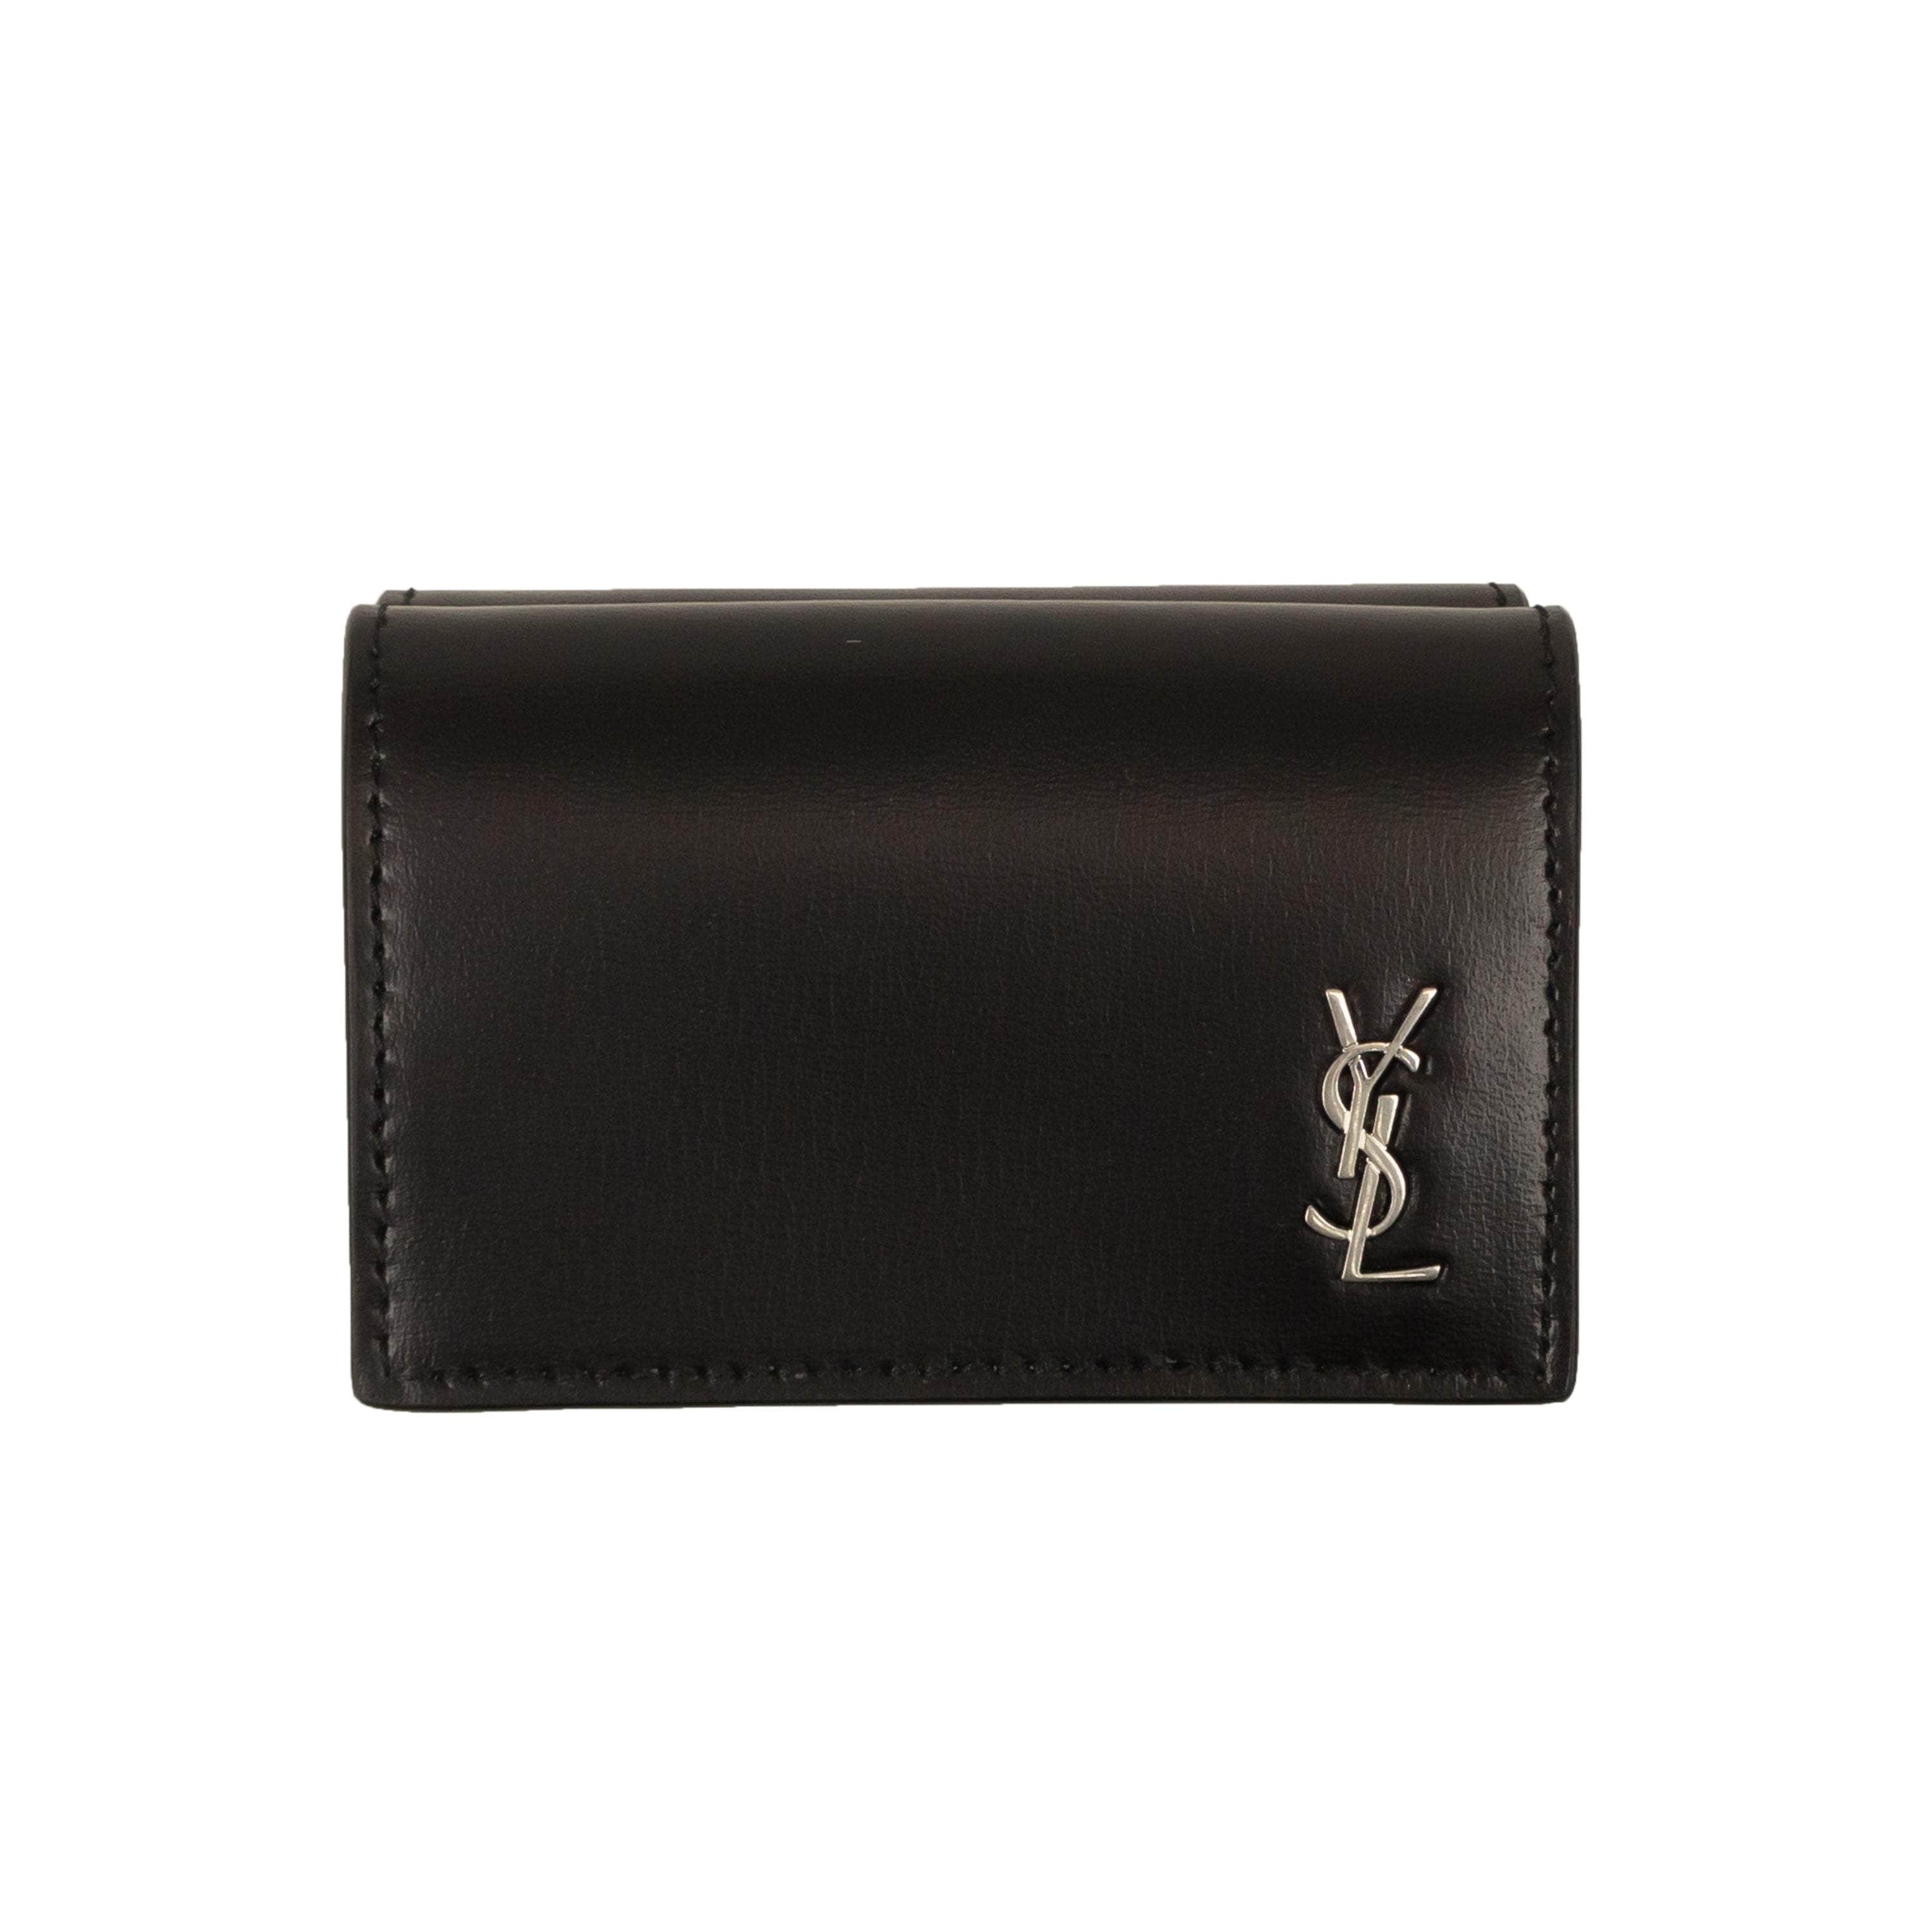 Saint Laurent 250-500, channelenable-all, chicmi, couponcollection, gender-mens, main-handbags, mens-shoes, mens-wallets-cardholders, saint-laurent, size-os OS / 685656_1JB2E_1000 Black Calf Leather Metal Logo Wallet YSL-XACC-0019/OS YSL-XACC-0019/OS